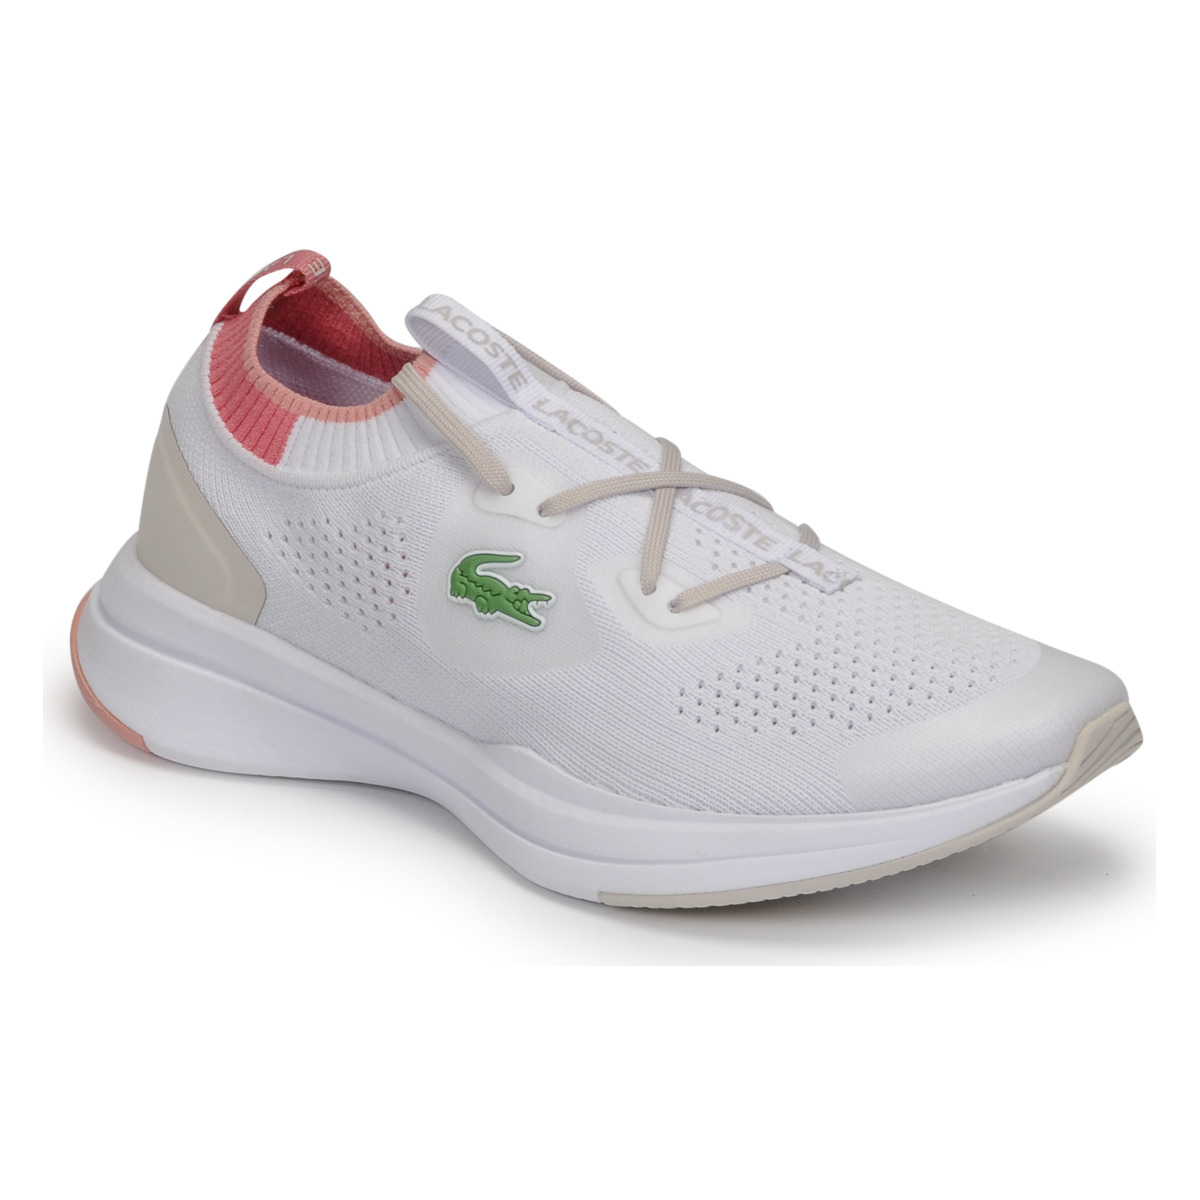 Chaussures Femme el producto Lacoste Carnaby Evo Colour-pop Leather EU 40 Black White RUN SPIN KNIT 0121 1 SFA Blanc / Rose